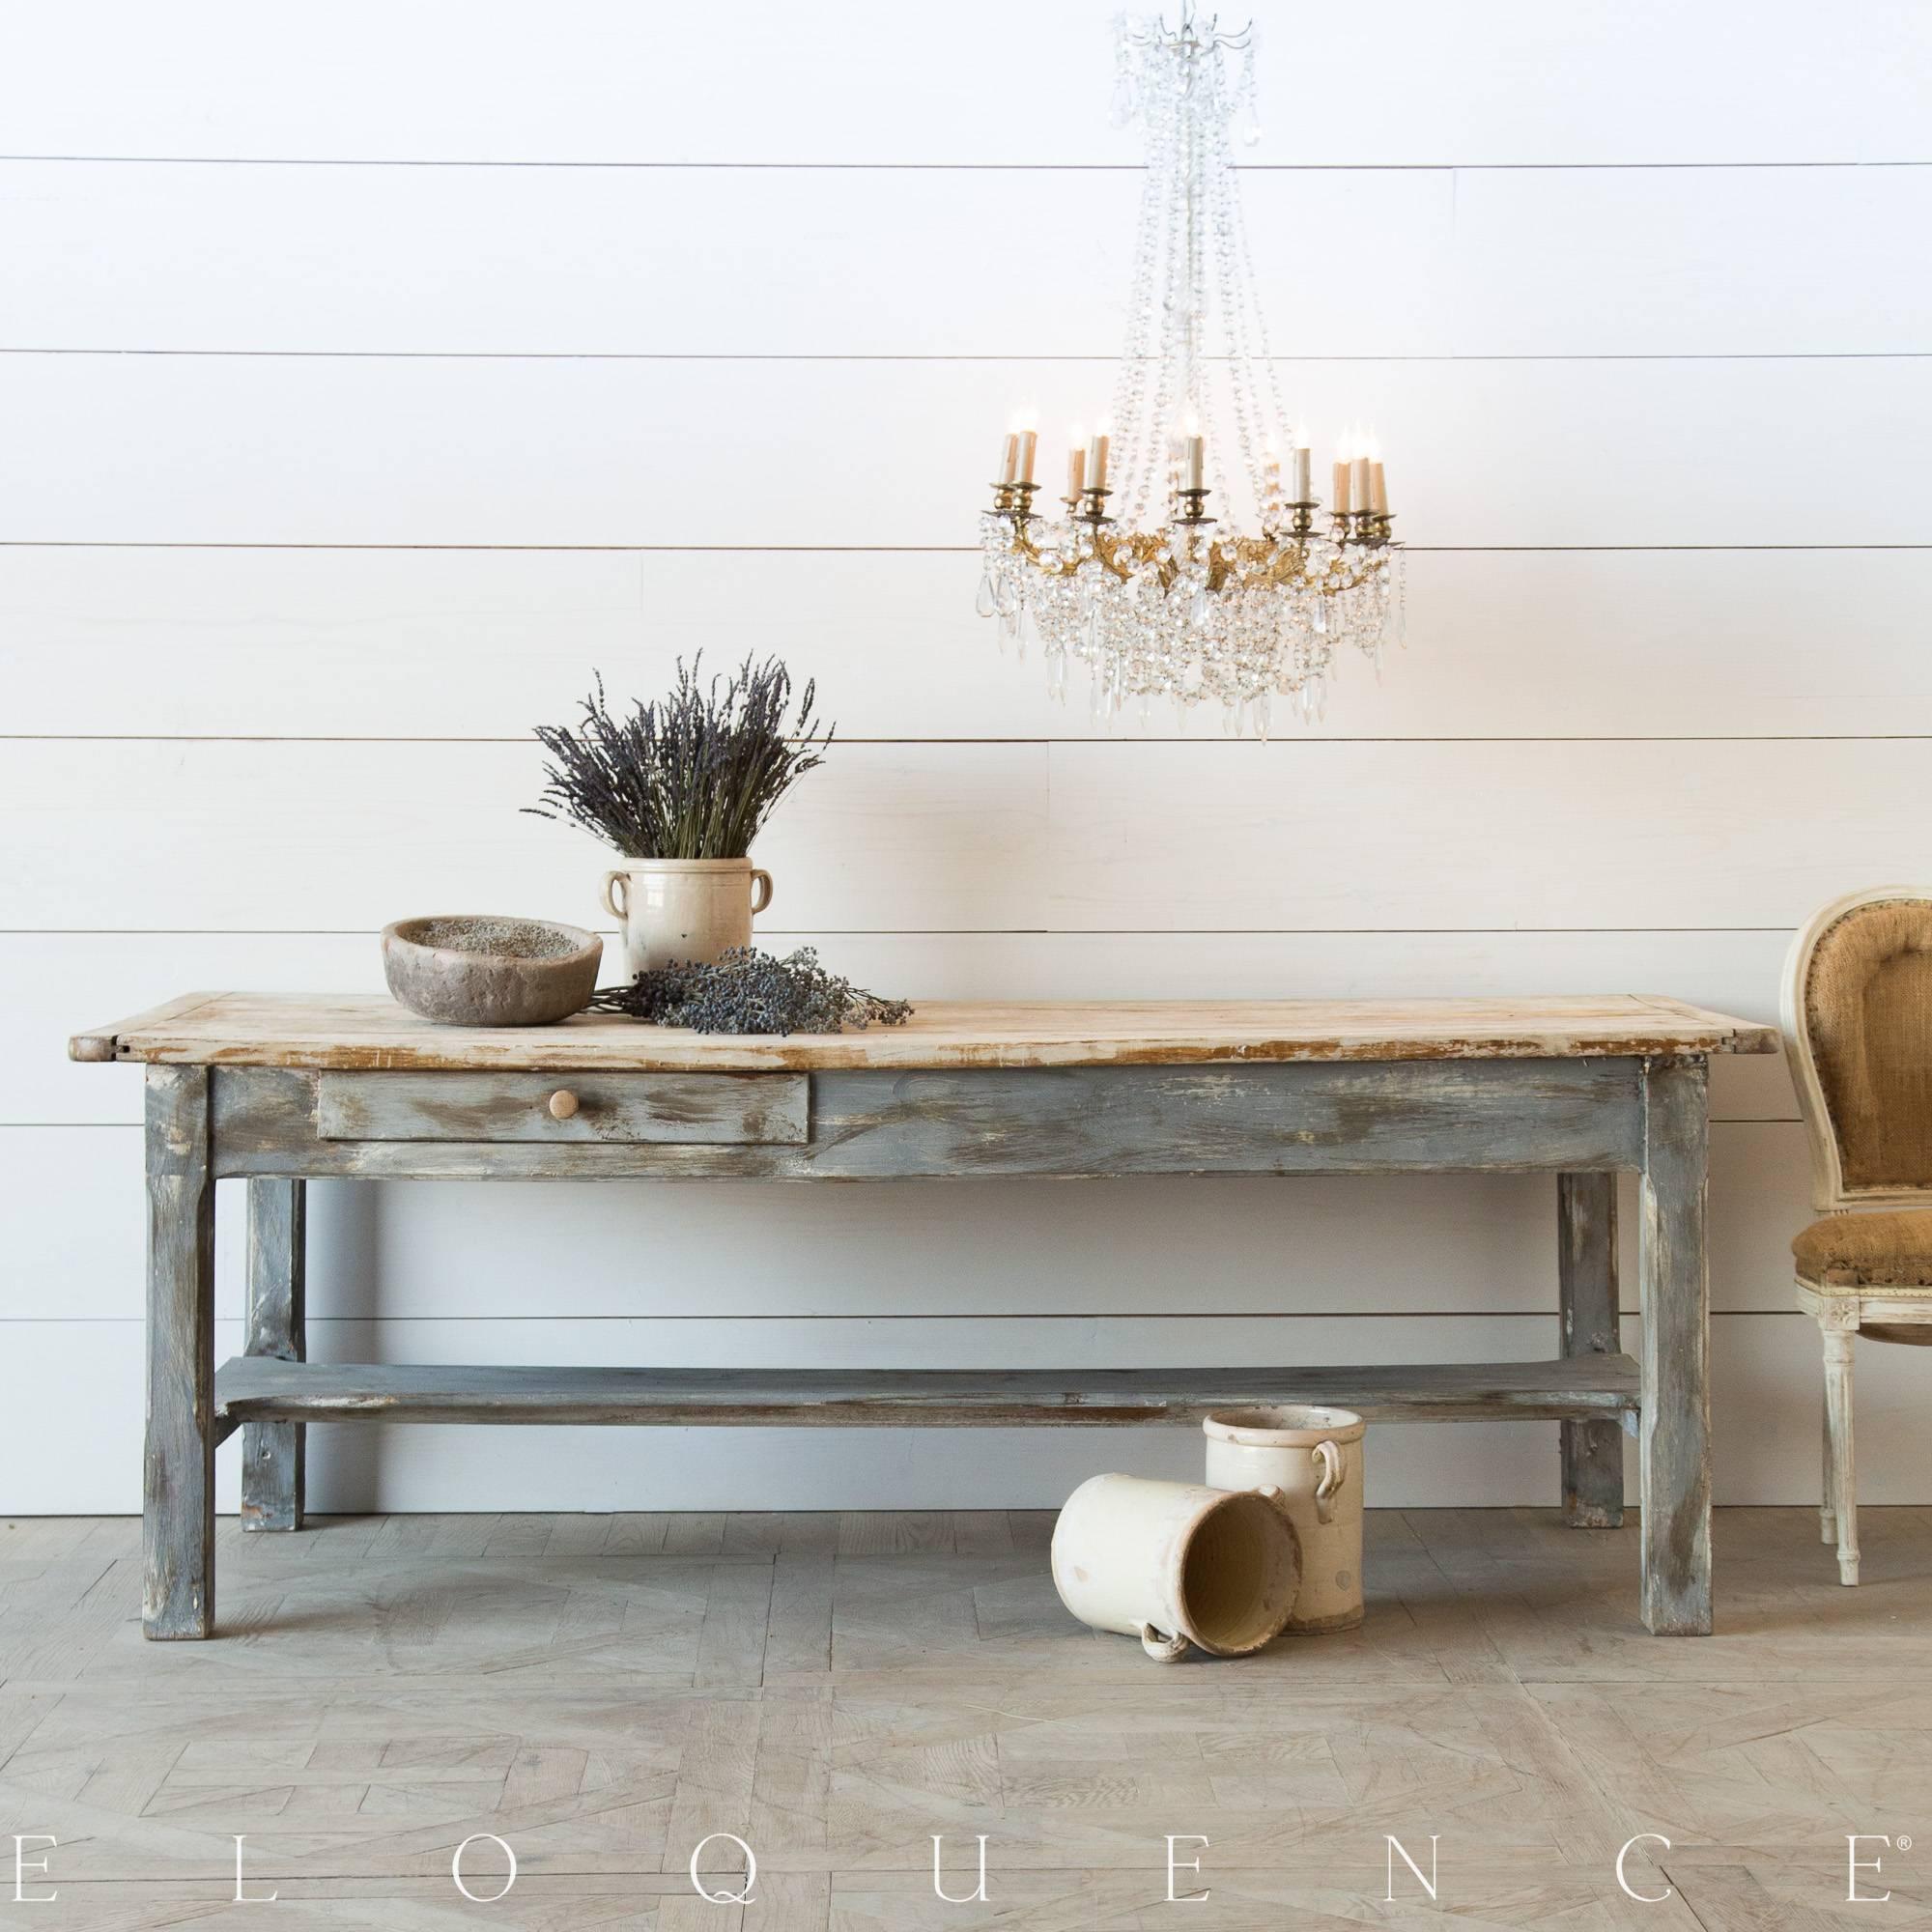 Gorgeous antique farmhouse kitchen table. This sturdy table, built using solid planks features two drawers; one on either side of the piece. The dark grey and earthy hues of the apron and legs beautifully contrast the natural wood top. The surface